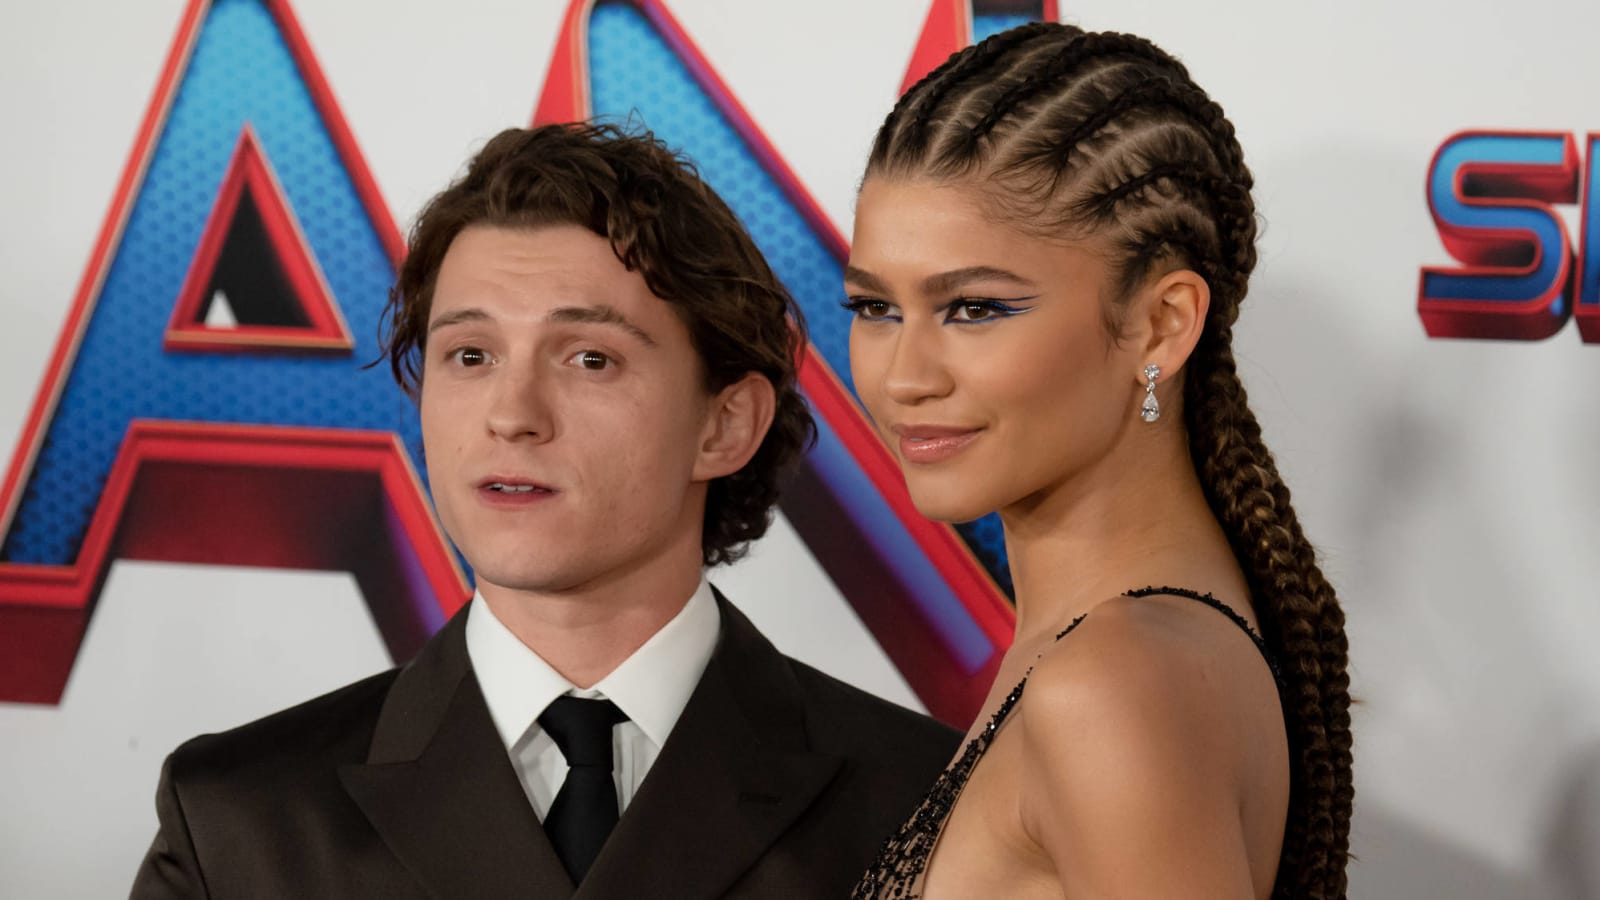 Zendaya says she and Tom Holland have 'talked about' getting him on 'Euphoria'